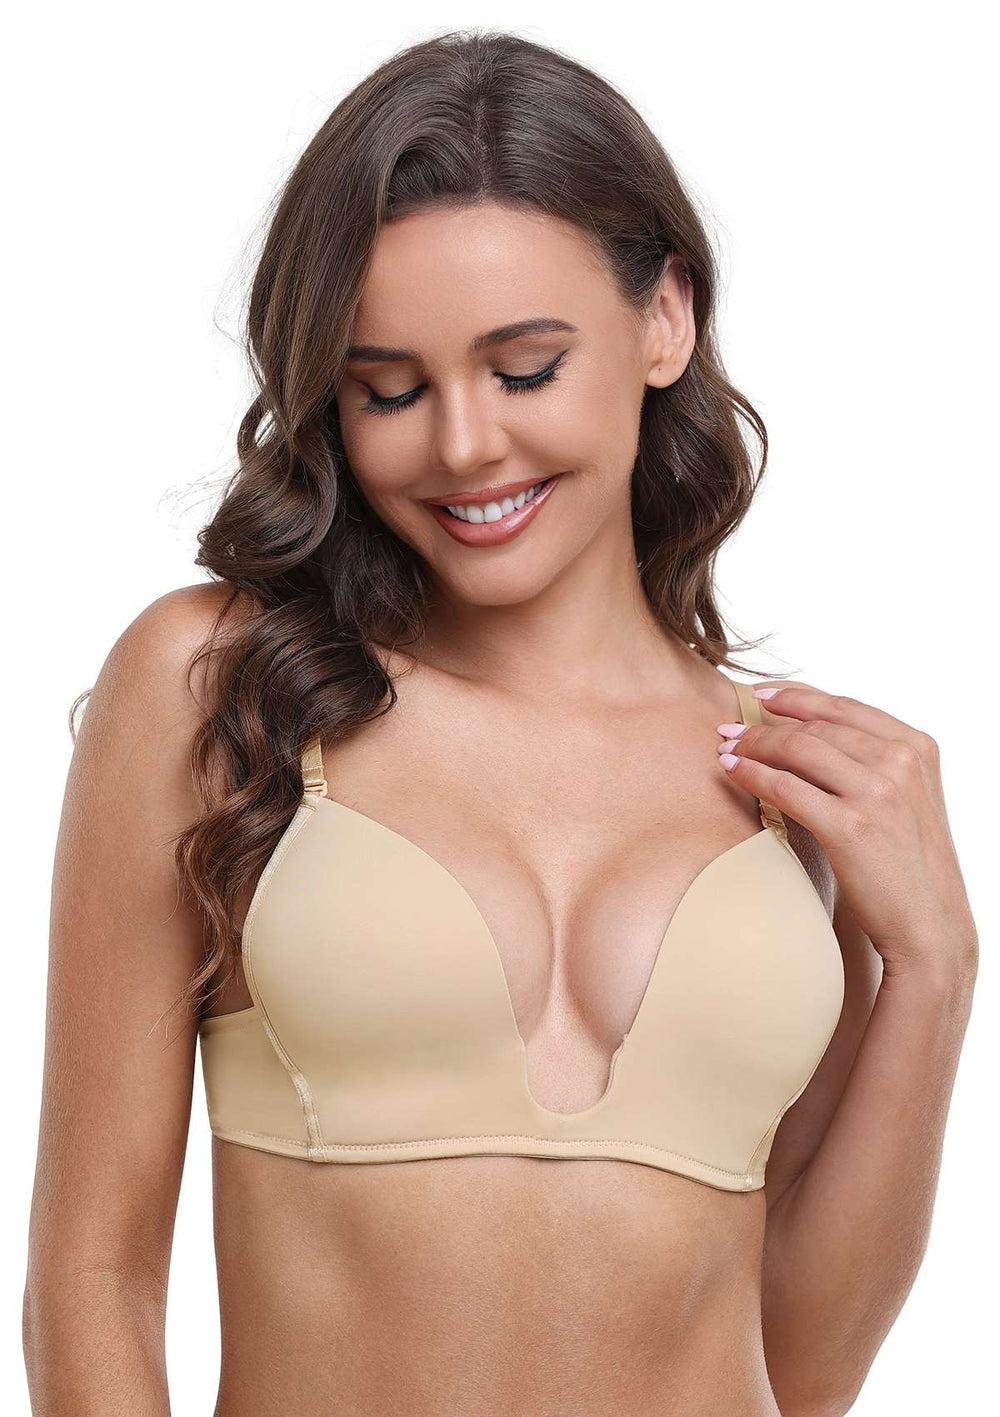 Padded Wirefree Bra - Shop Padded Non Wired Bras Online(Page 41)